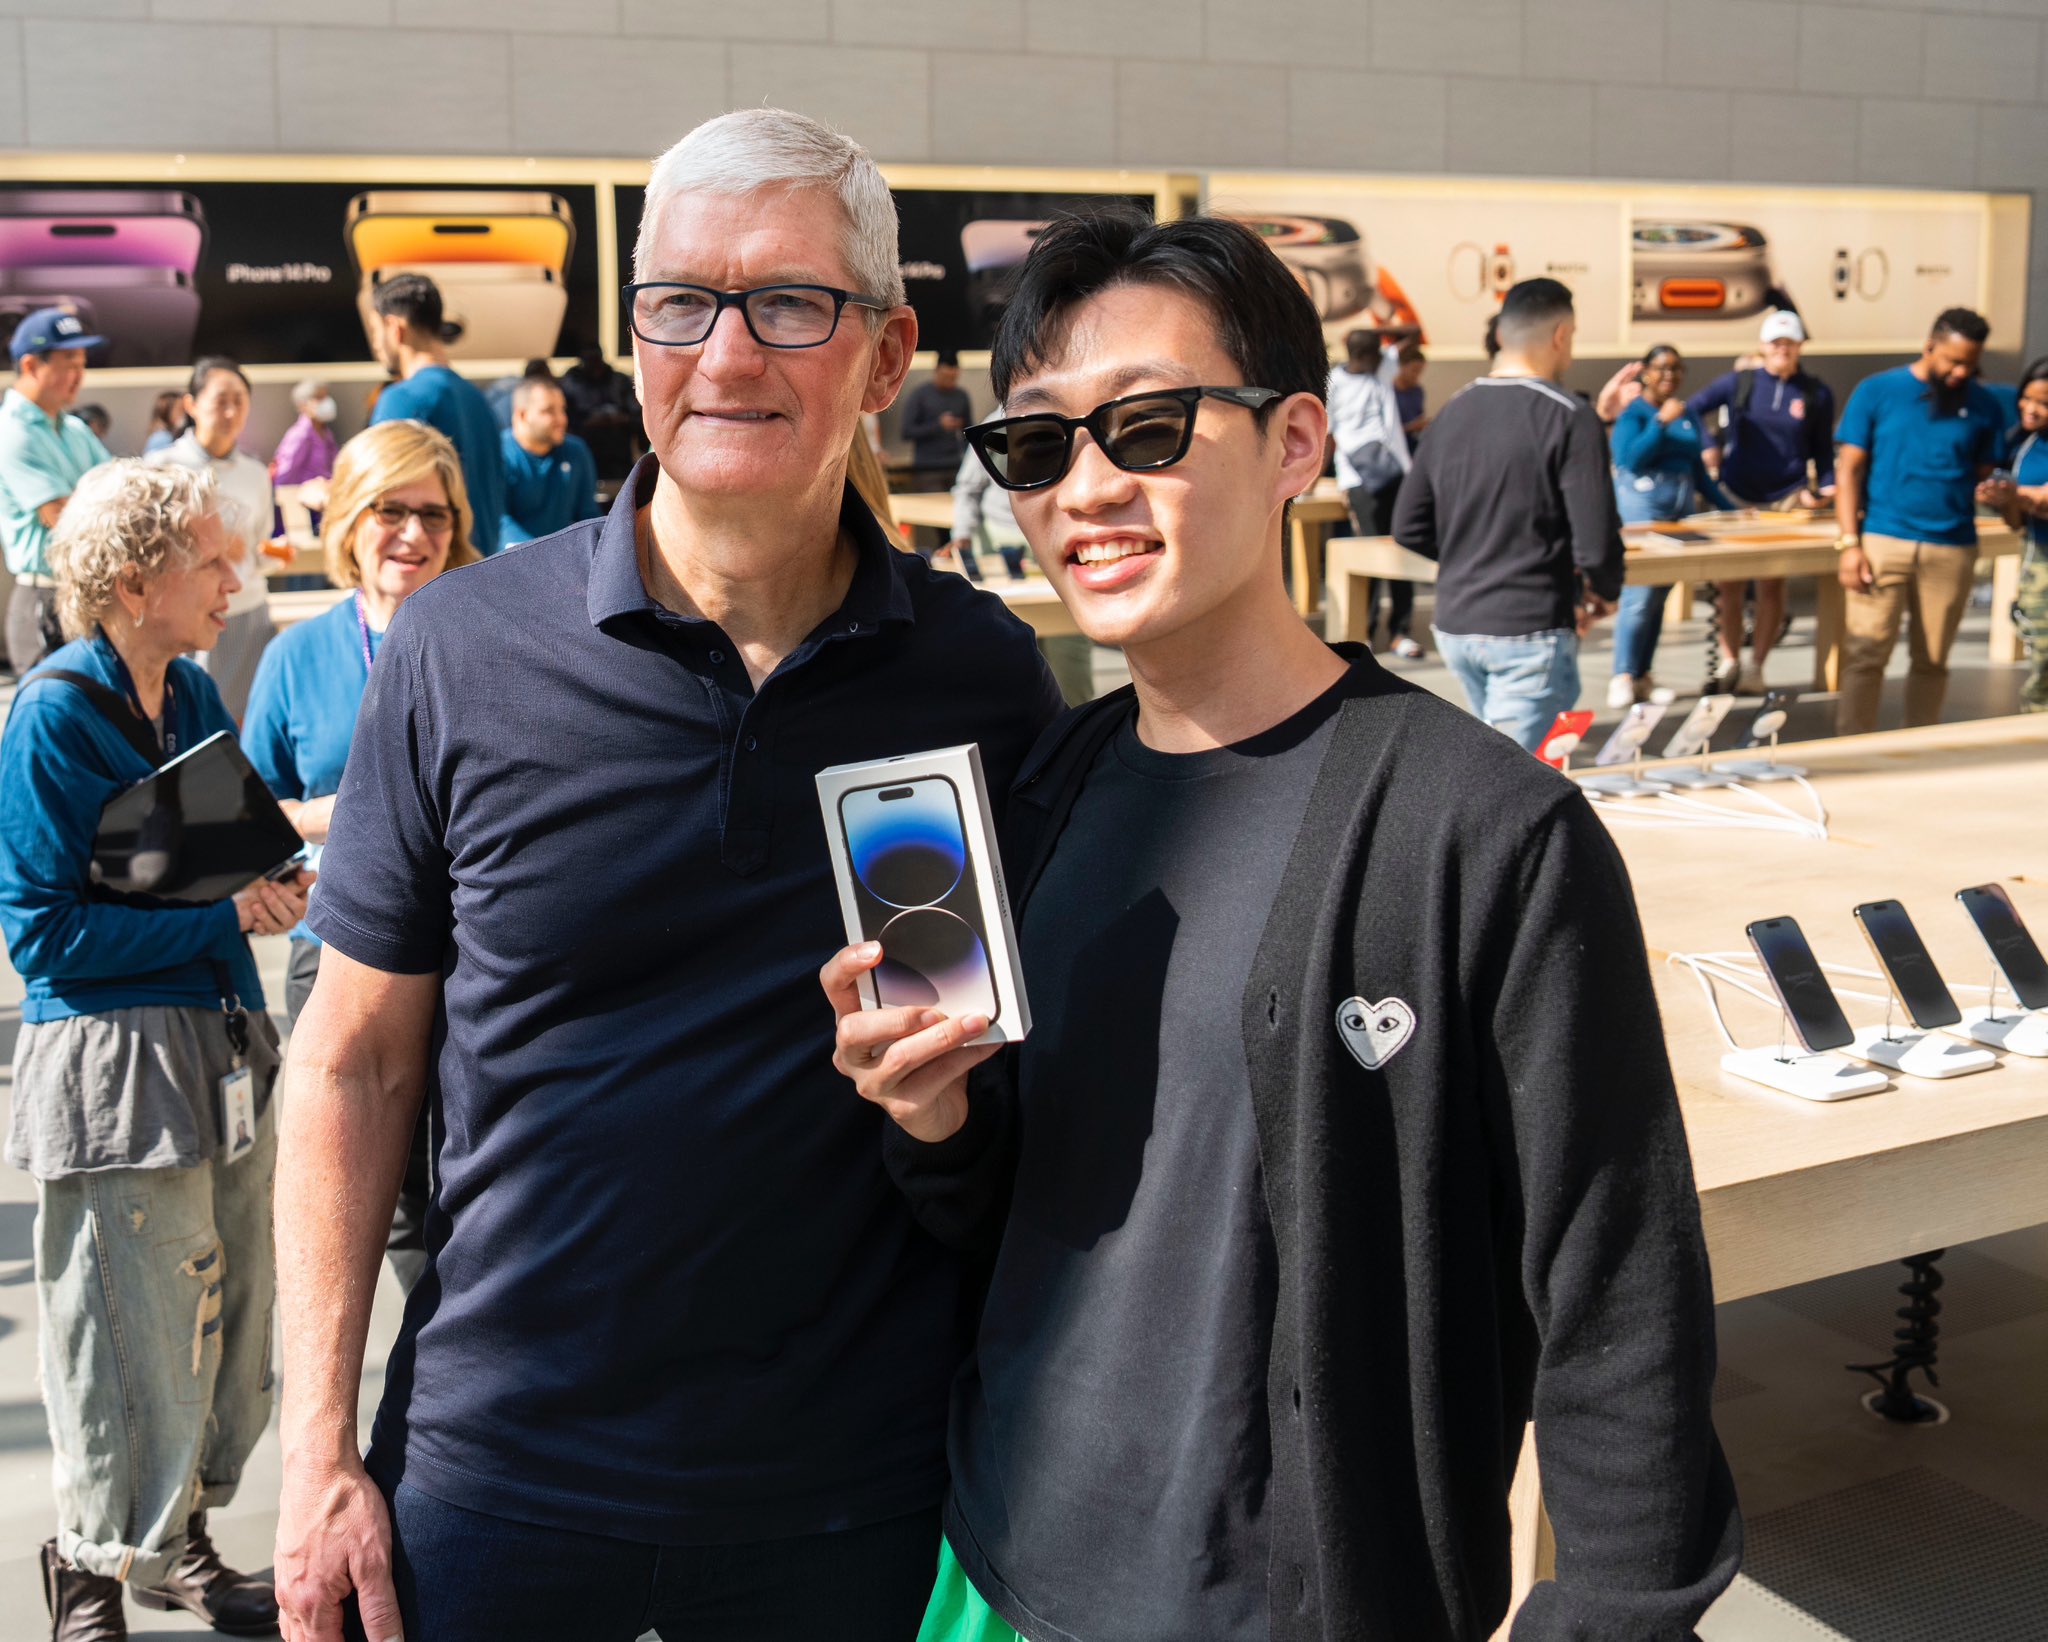 apotek klippe sporadisk Tim Cook on Twitter: "Great spending time with our teams and customers at  Apple Fifth Avenue, Apple Upper West Side, and Apple Upper East Side. I ❤️  NY! https://t.co/W1HNrt9cMm" / Twitter